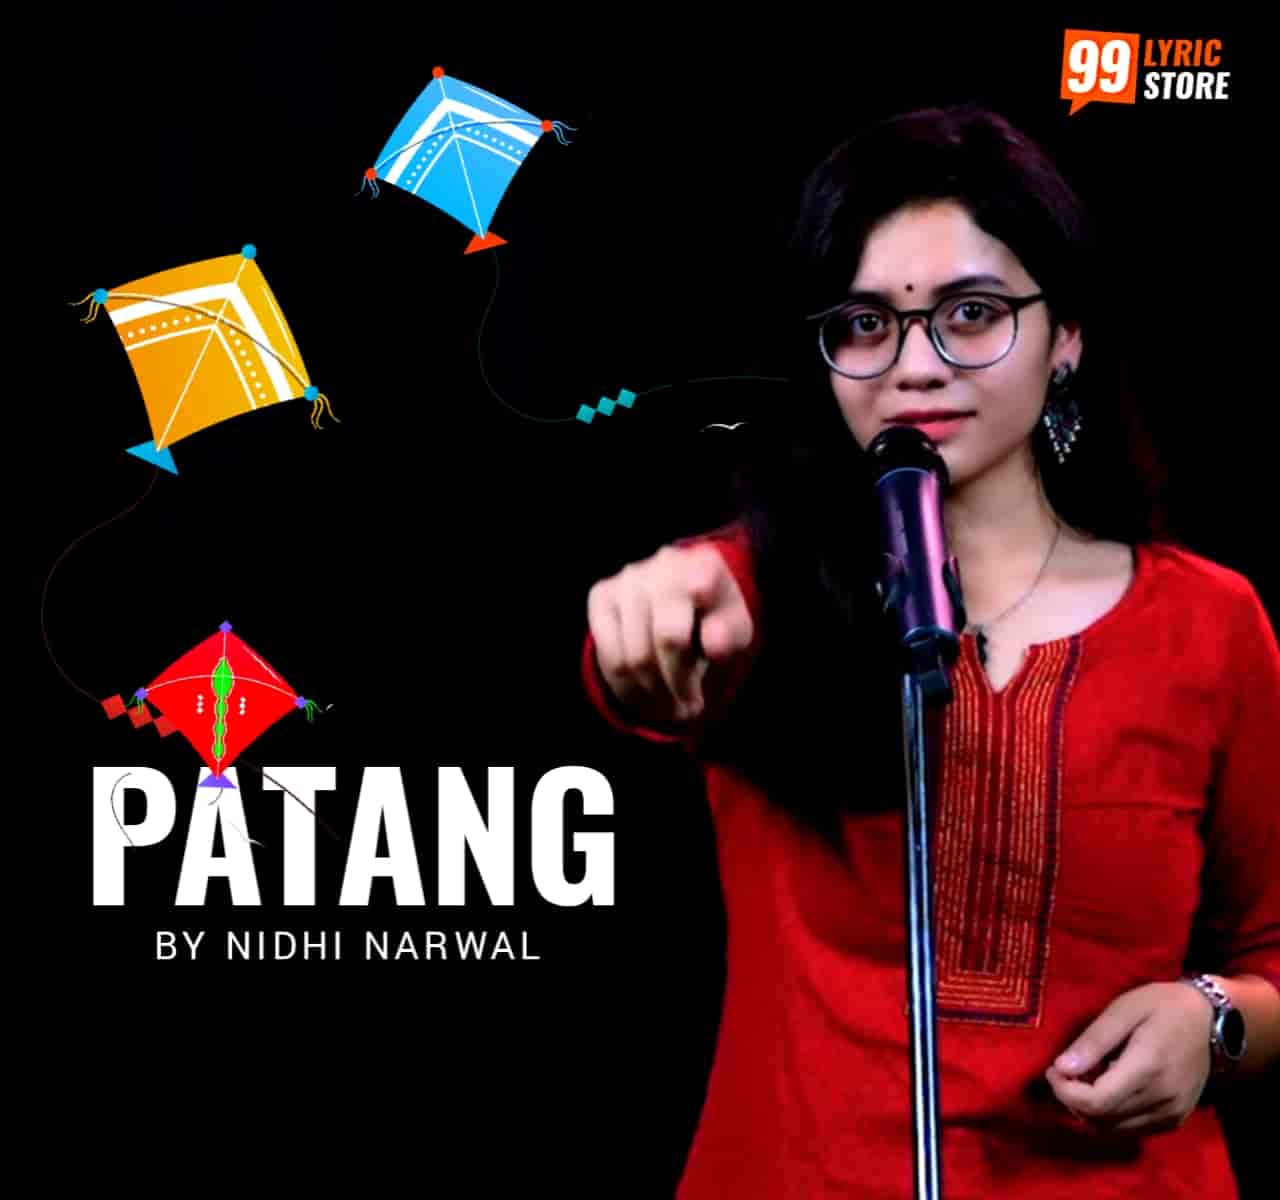 A very young, Famous and YouTube poetess Nidhi Narwal come back again with a beautiful poerty which is titled 'Patang'.